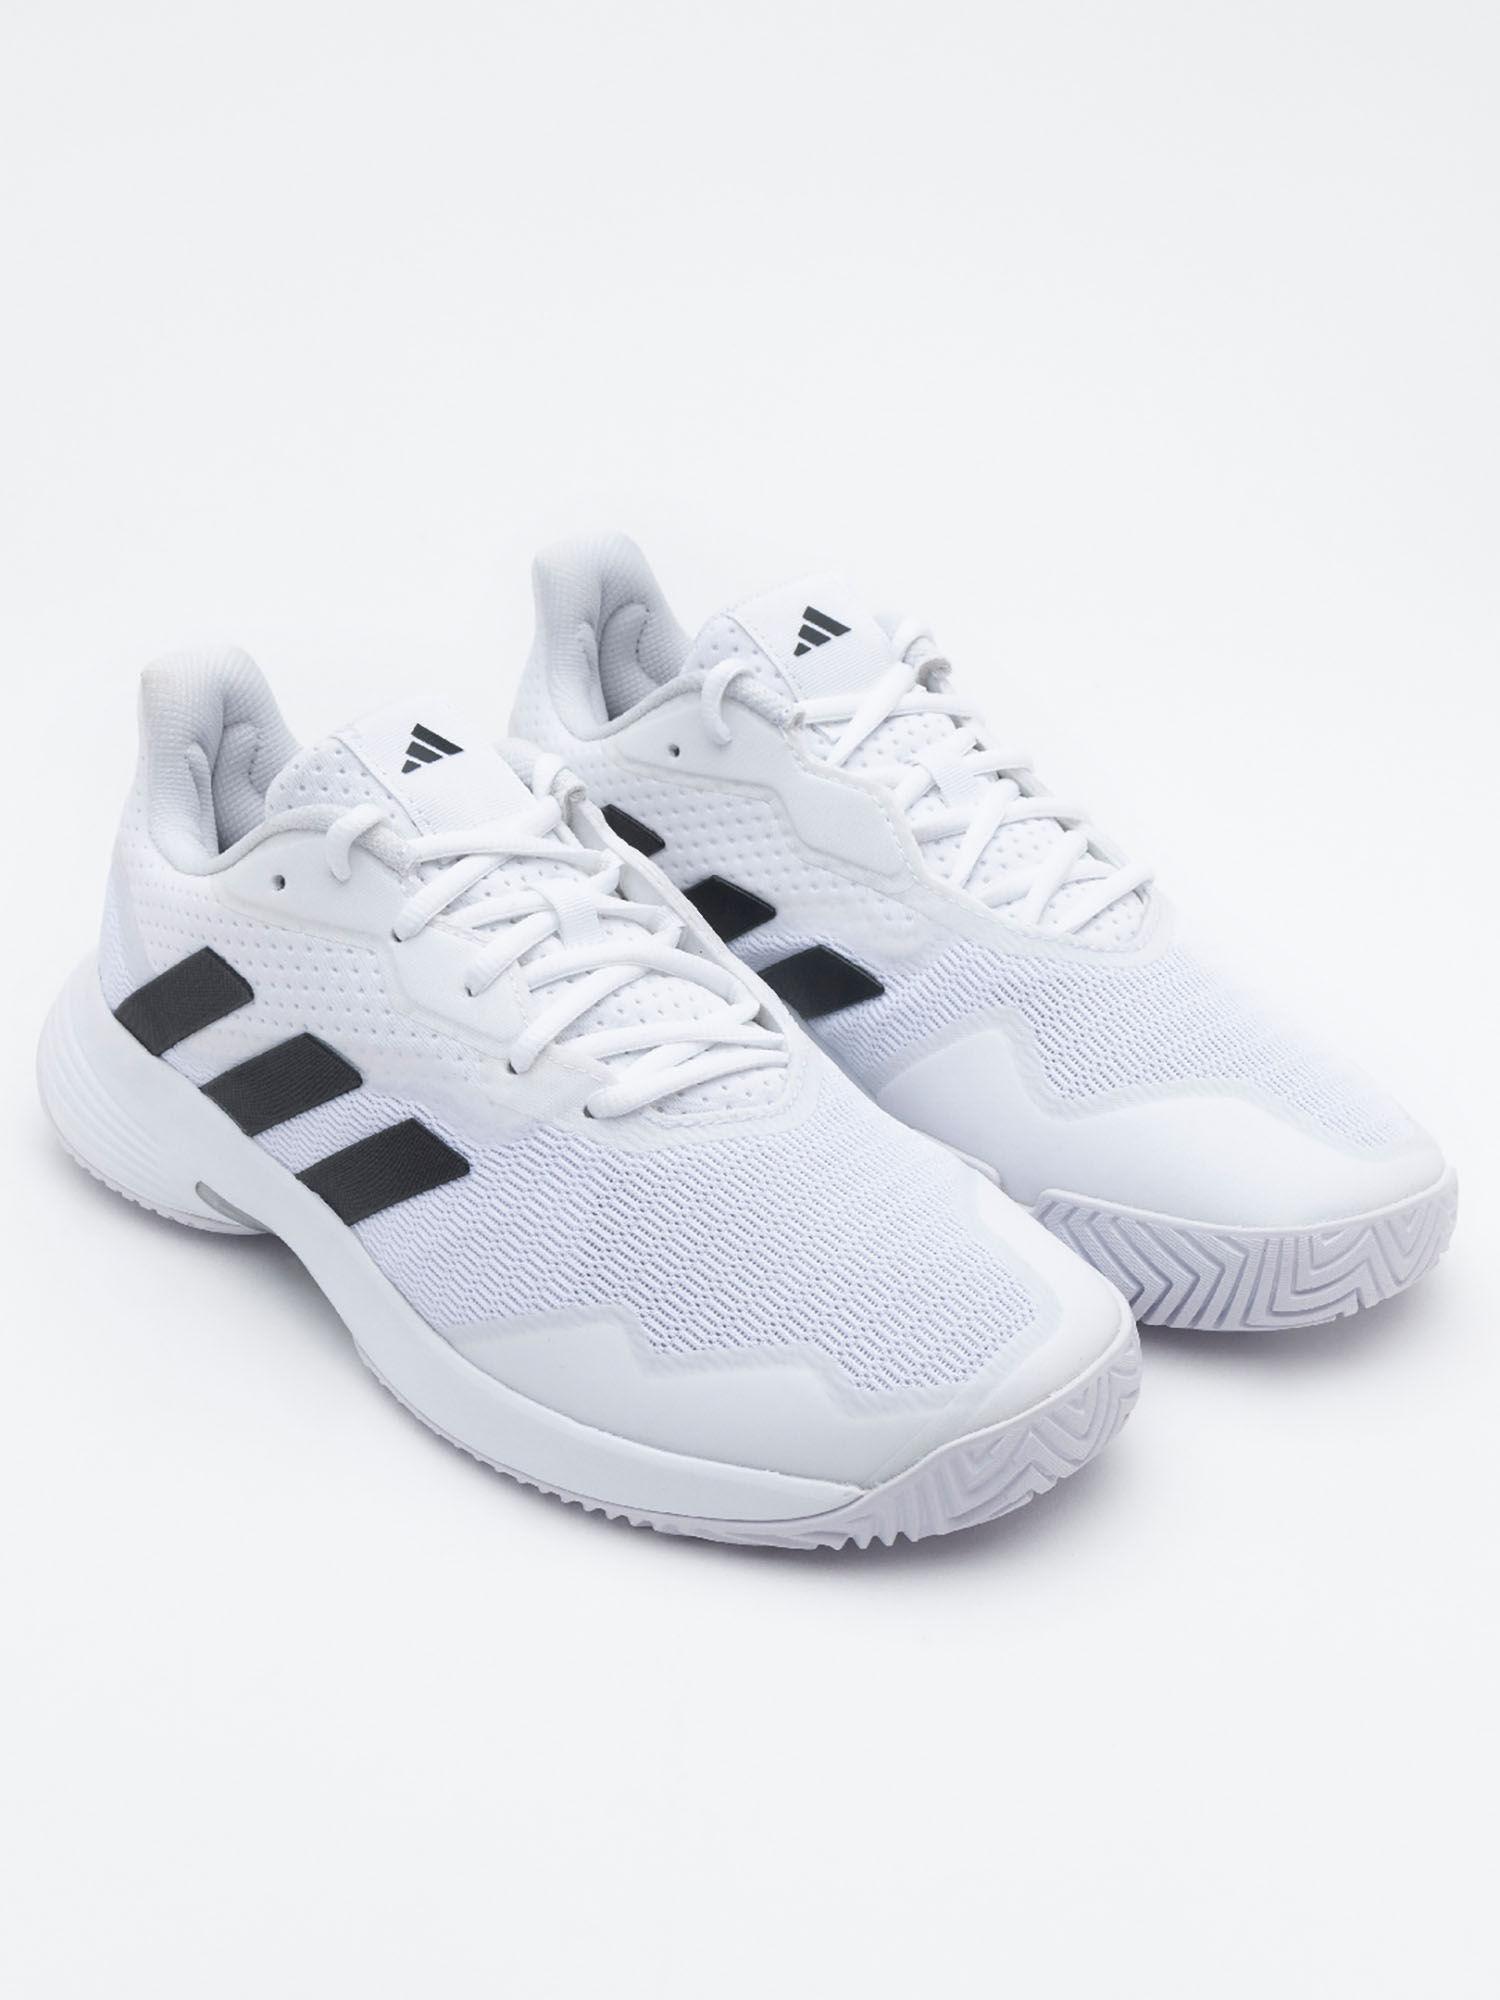 courtjam-control-m-tennis-shoes-white